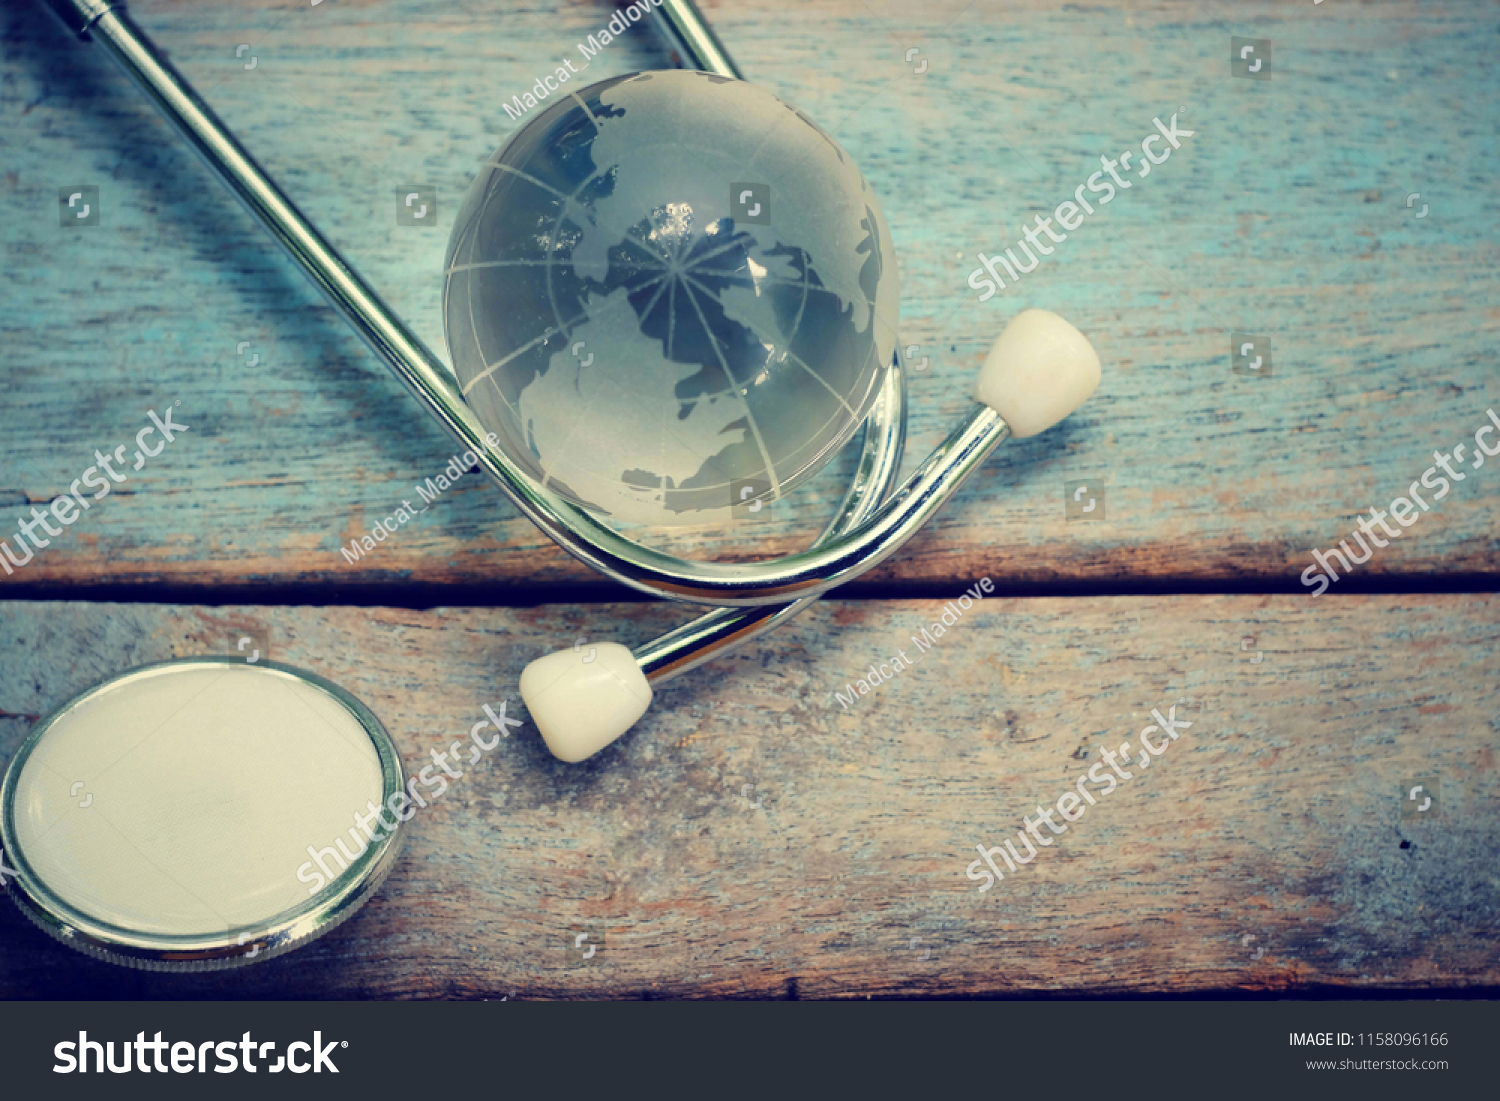 close up glass global and stethoscope on old wood table, world health day, medical and healthcare technology concept, vintage tone #1158096166